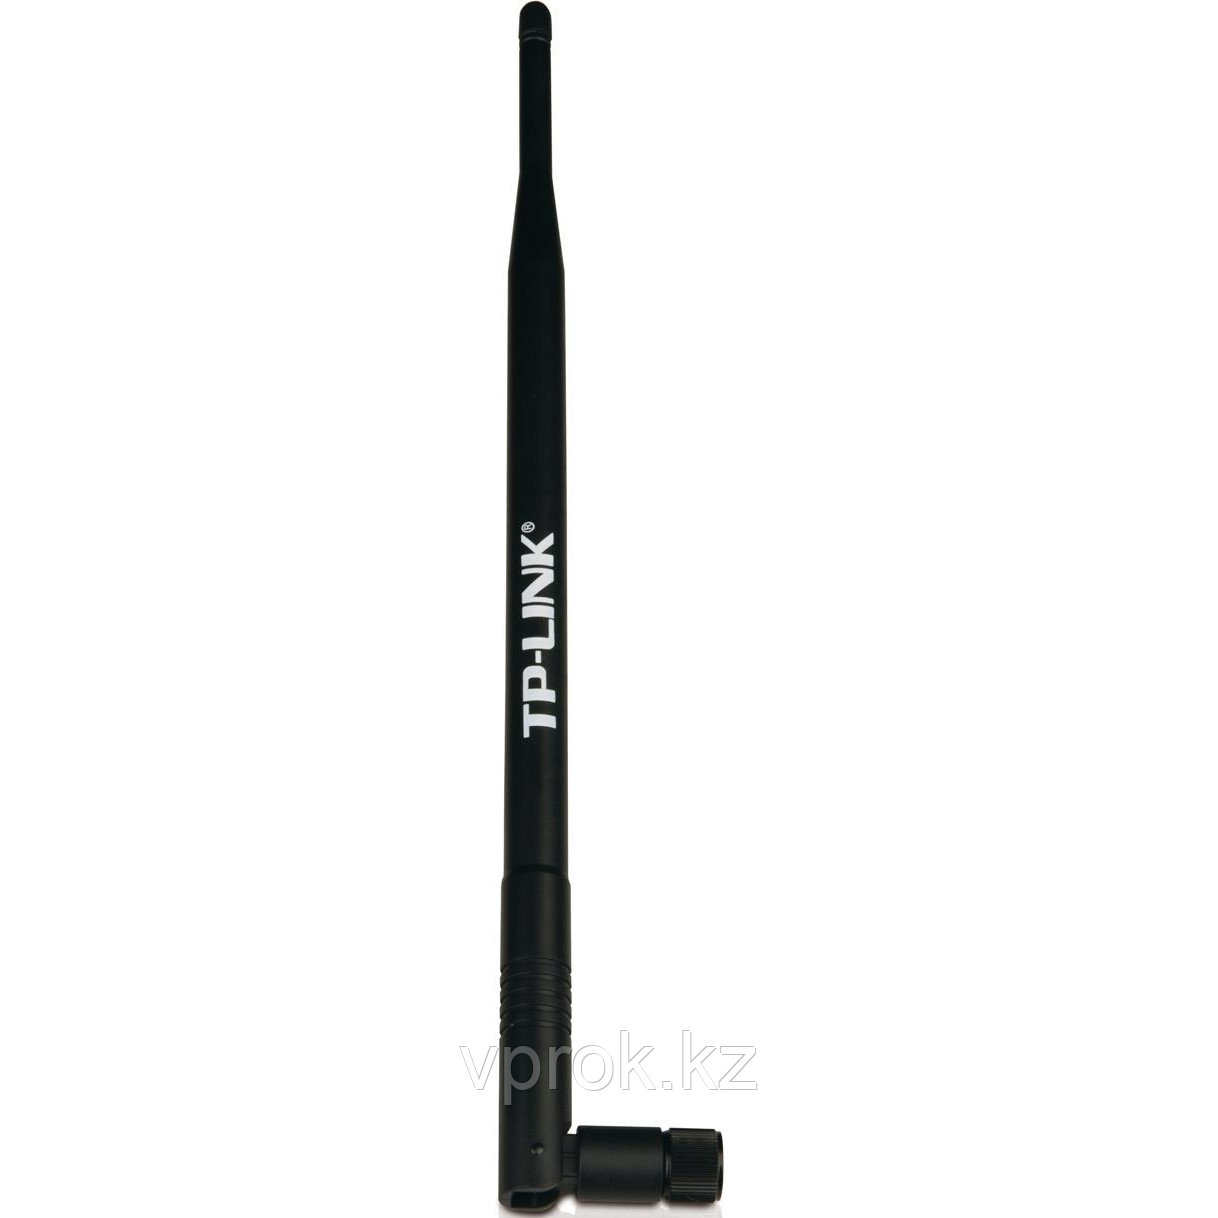 Антенна "TP-Link  8dBi, 2.4GHz, Indoor, Omni-directional Antenna, M:TL-ANT2408CL"